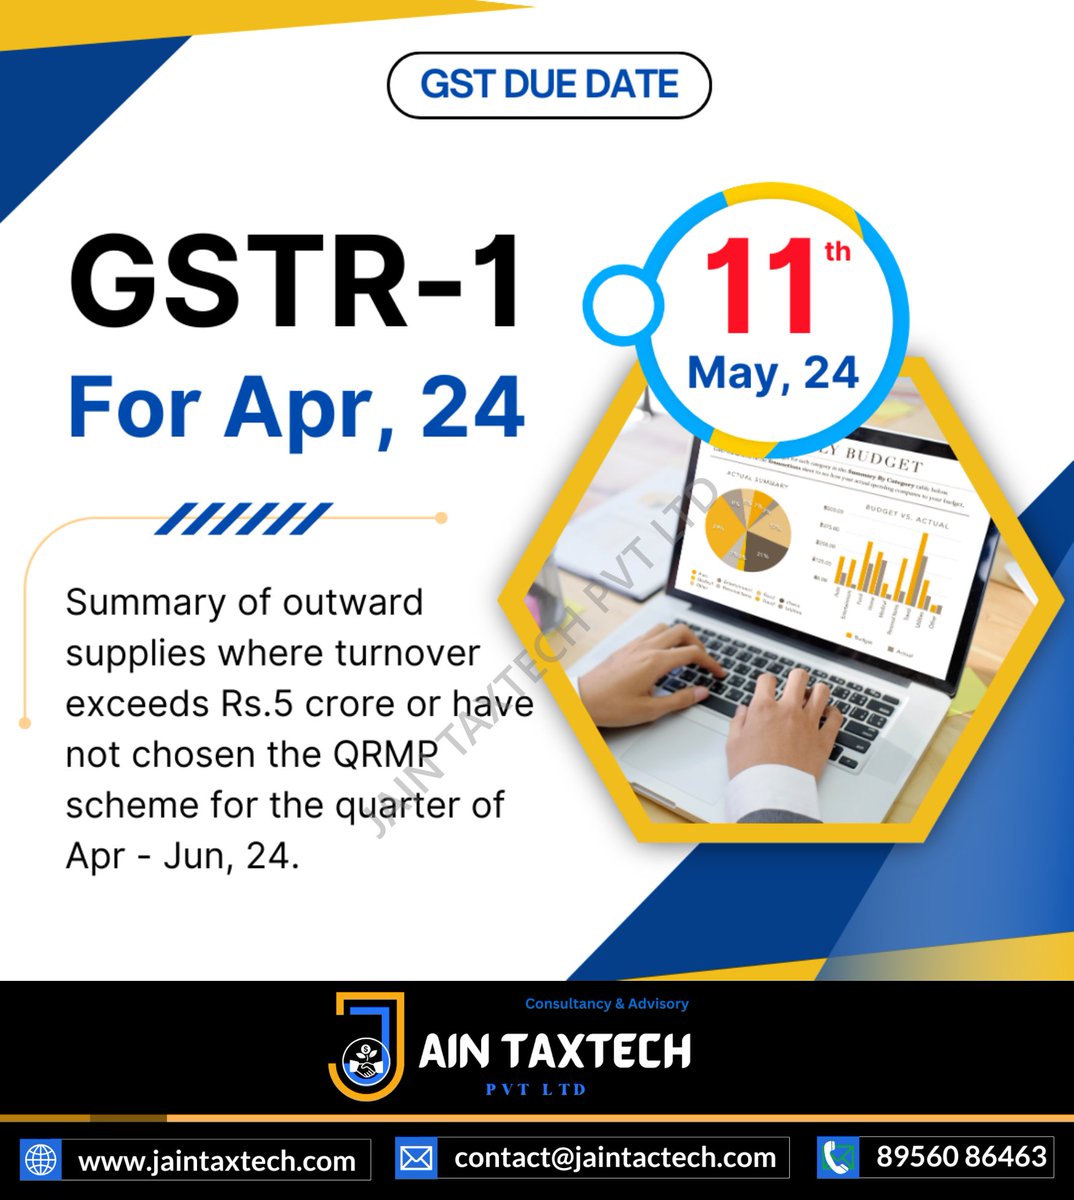 Attention Taxpayers! 📊 It's time to file your GSTR-1 for April - June 2024, summarizing outward supplies. Ensure compliance if turnover exceeds Rs. 5 crore or if QRMP scheme not opted. Stay on track with Jain TaxTech! 💼📝#GSTR1 #TaxCompliance #TaxReform #IndianEconomy #GSTIndia